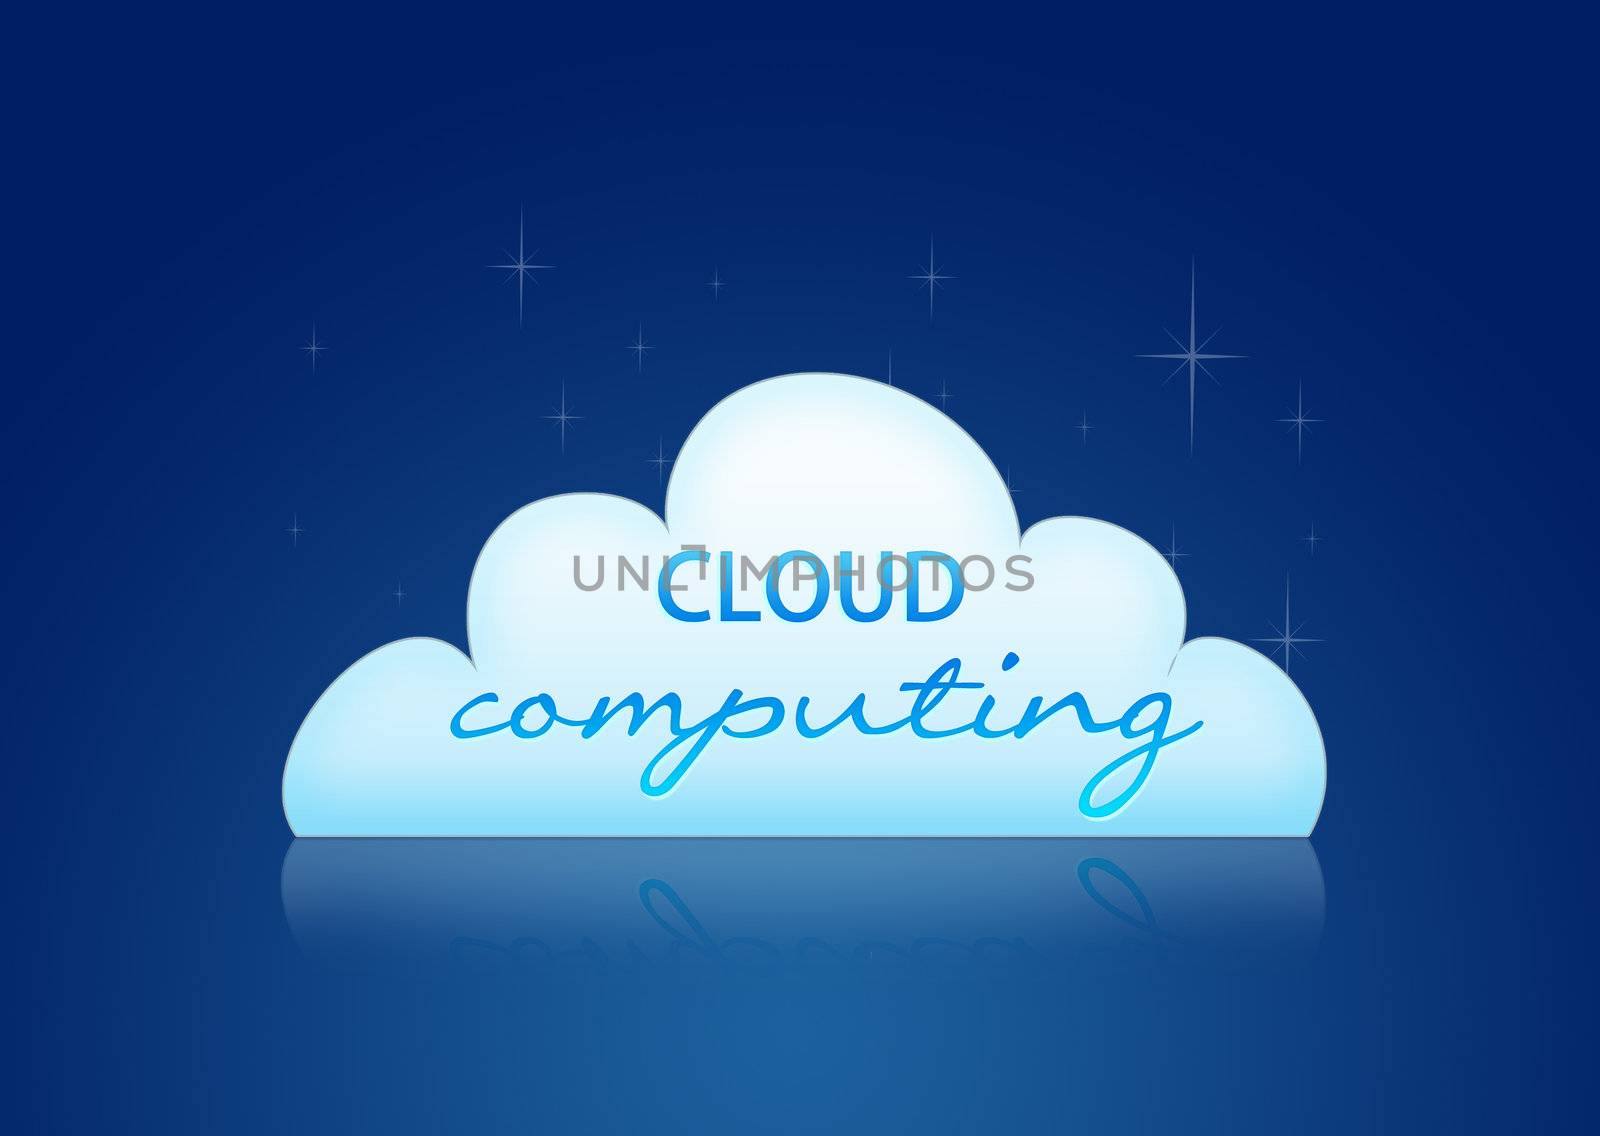 High resolution graphic of a cloud computing graphic on blue background.